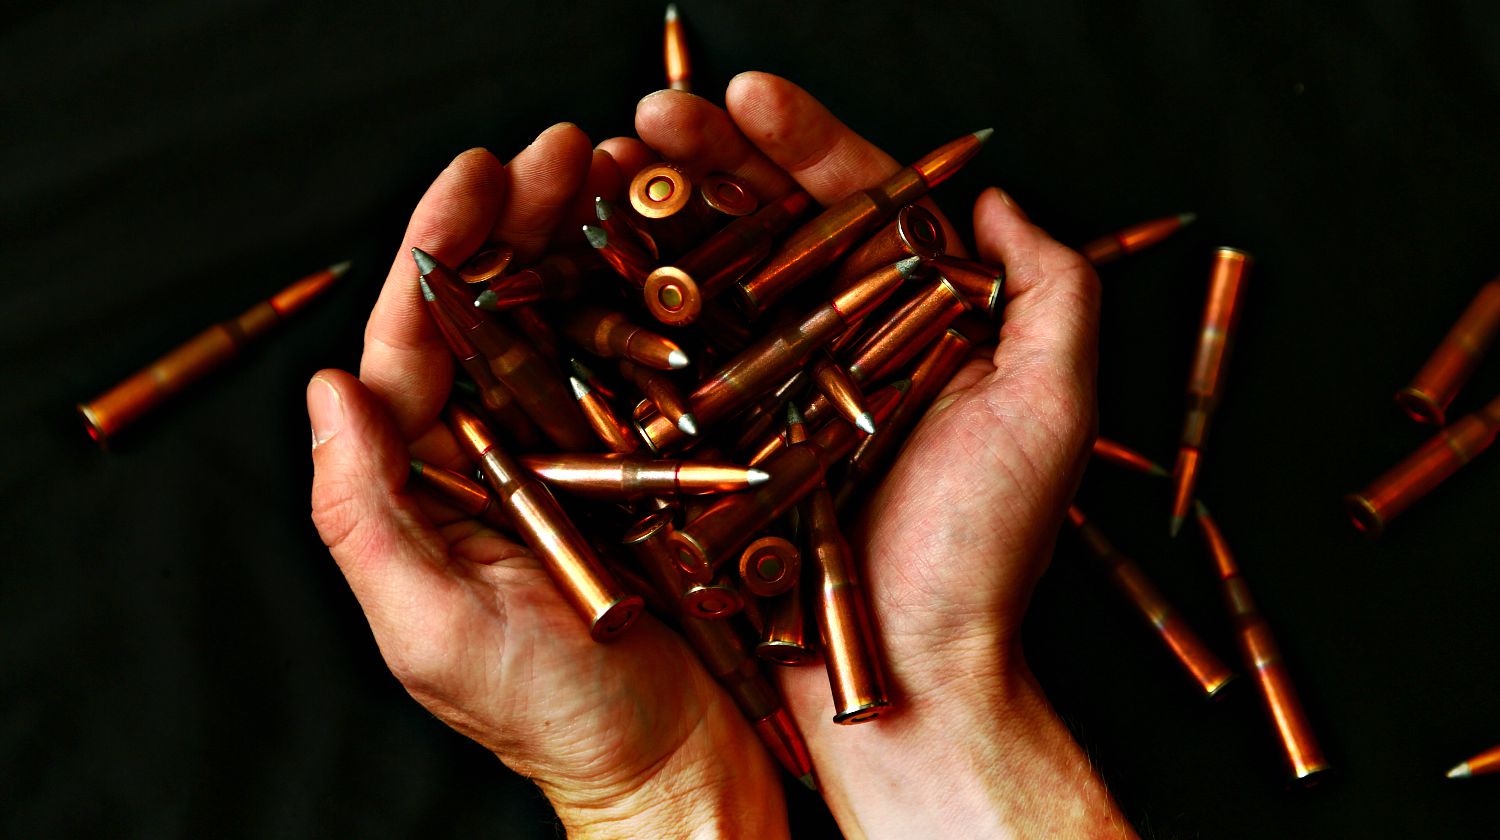 Hands holding a large amount of high powered rifle ammunition | Bulk Ammo | Budget Reloading Supplies | Featured